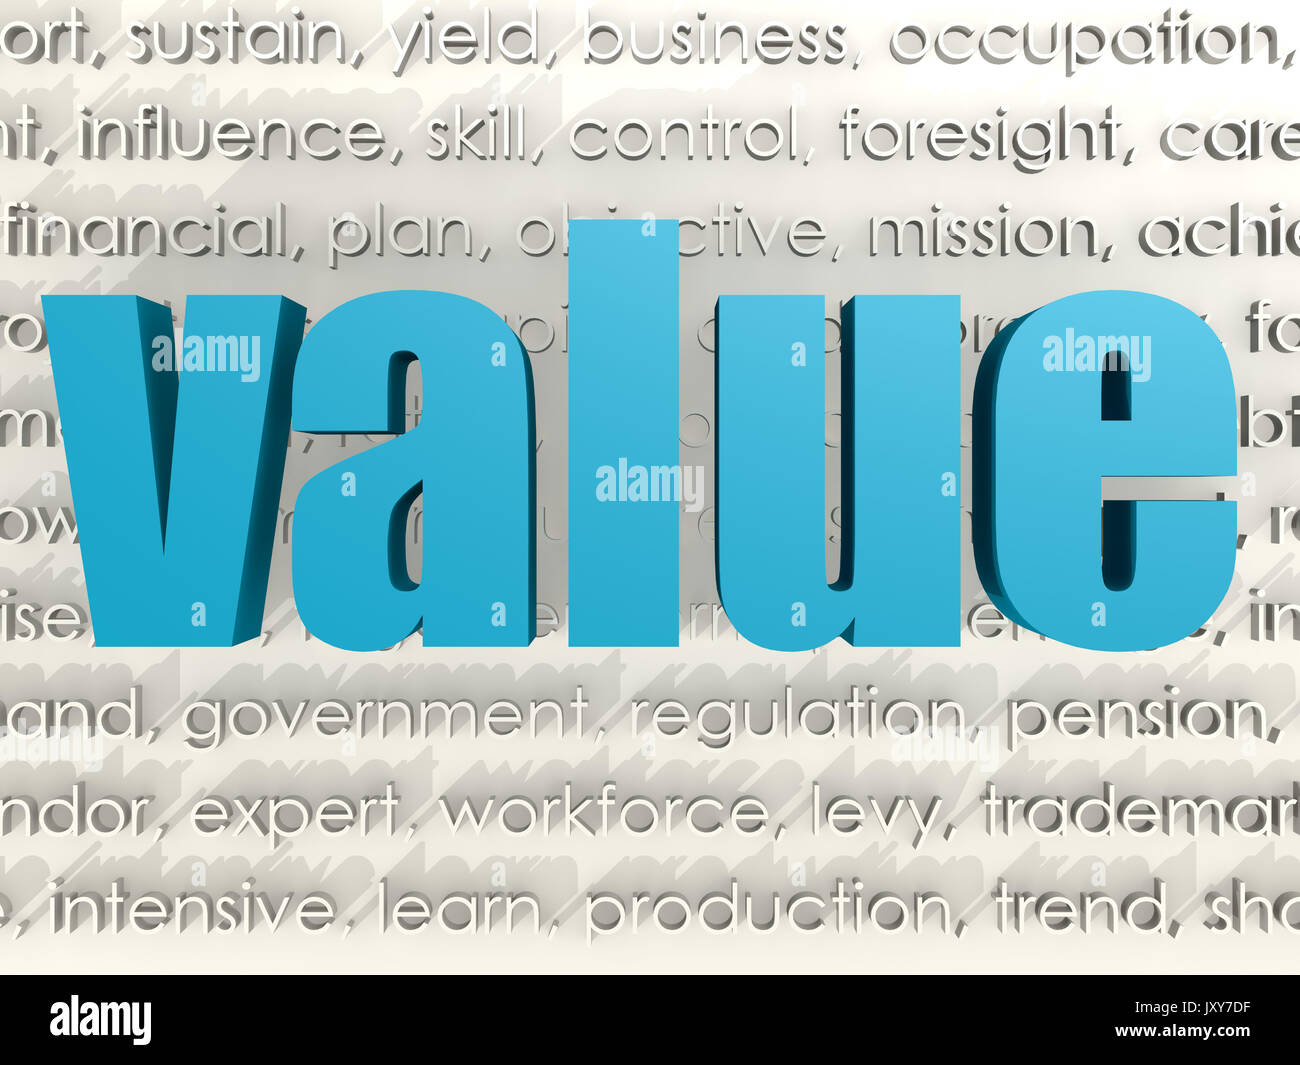 Value Word Cloud Concept Image With Hi Res Rendered Artwork That Could Be Used For Any Graphic 0583